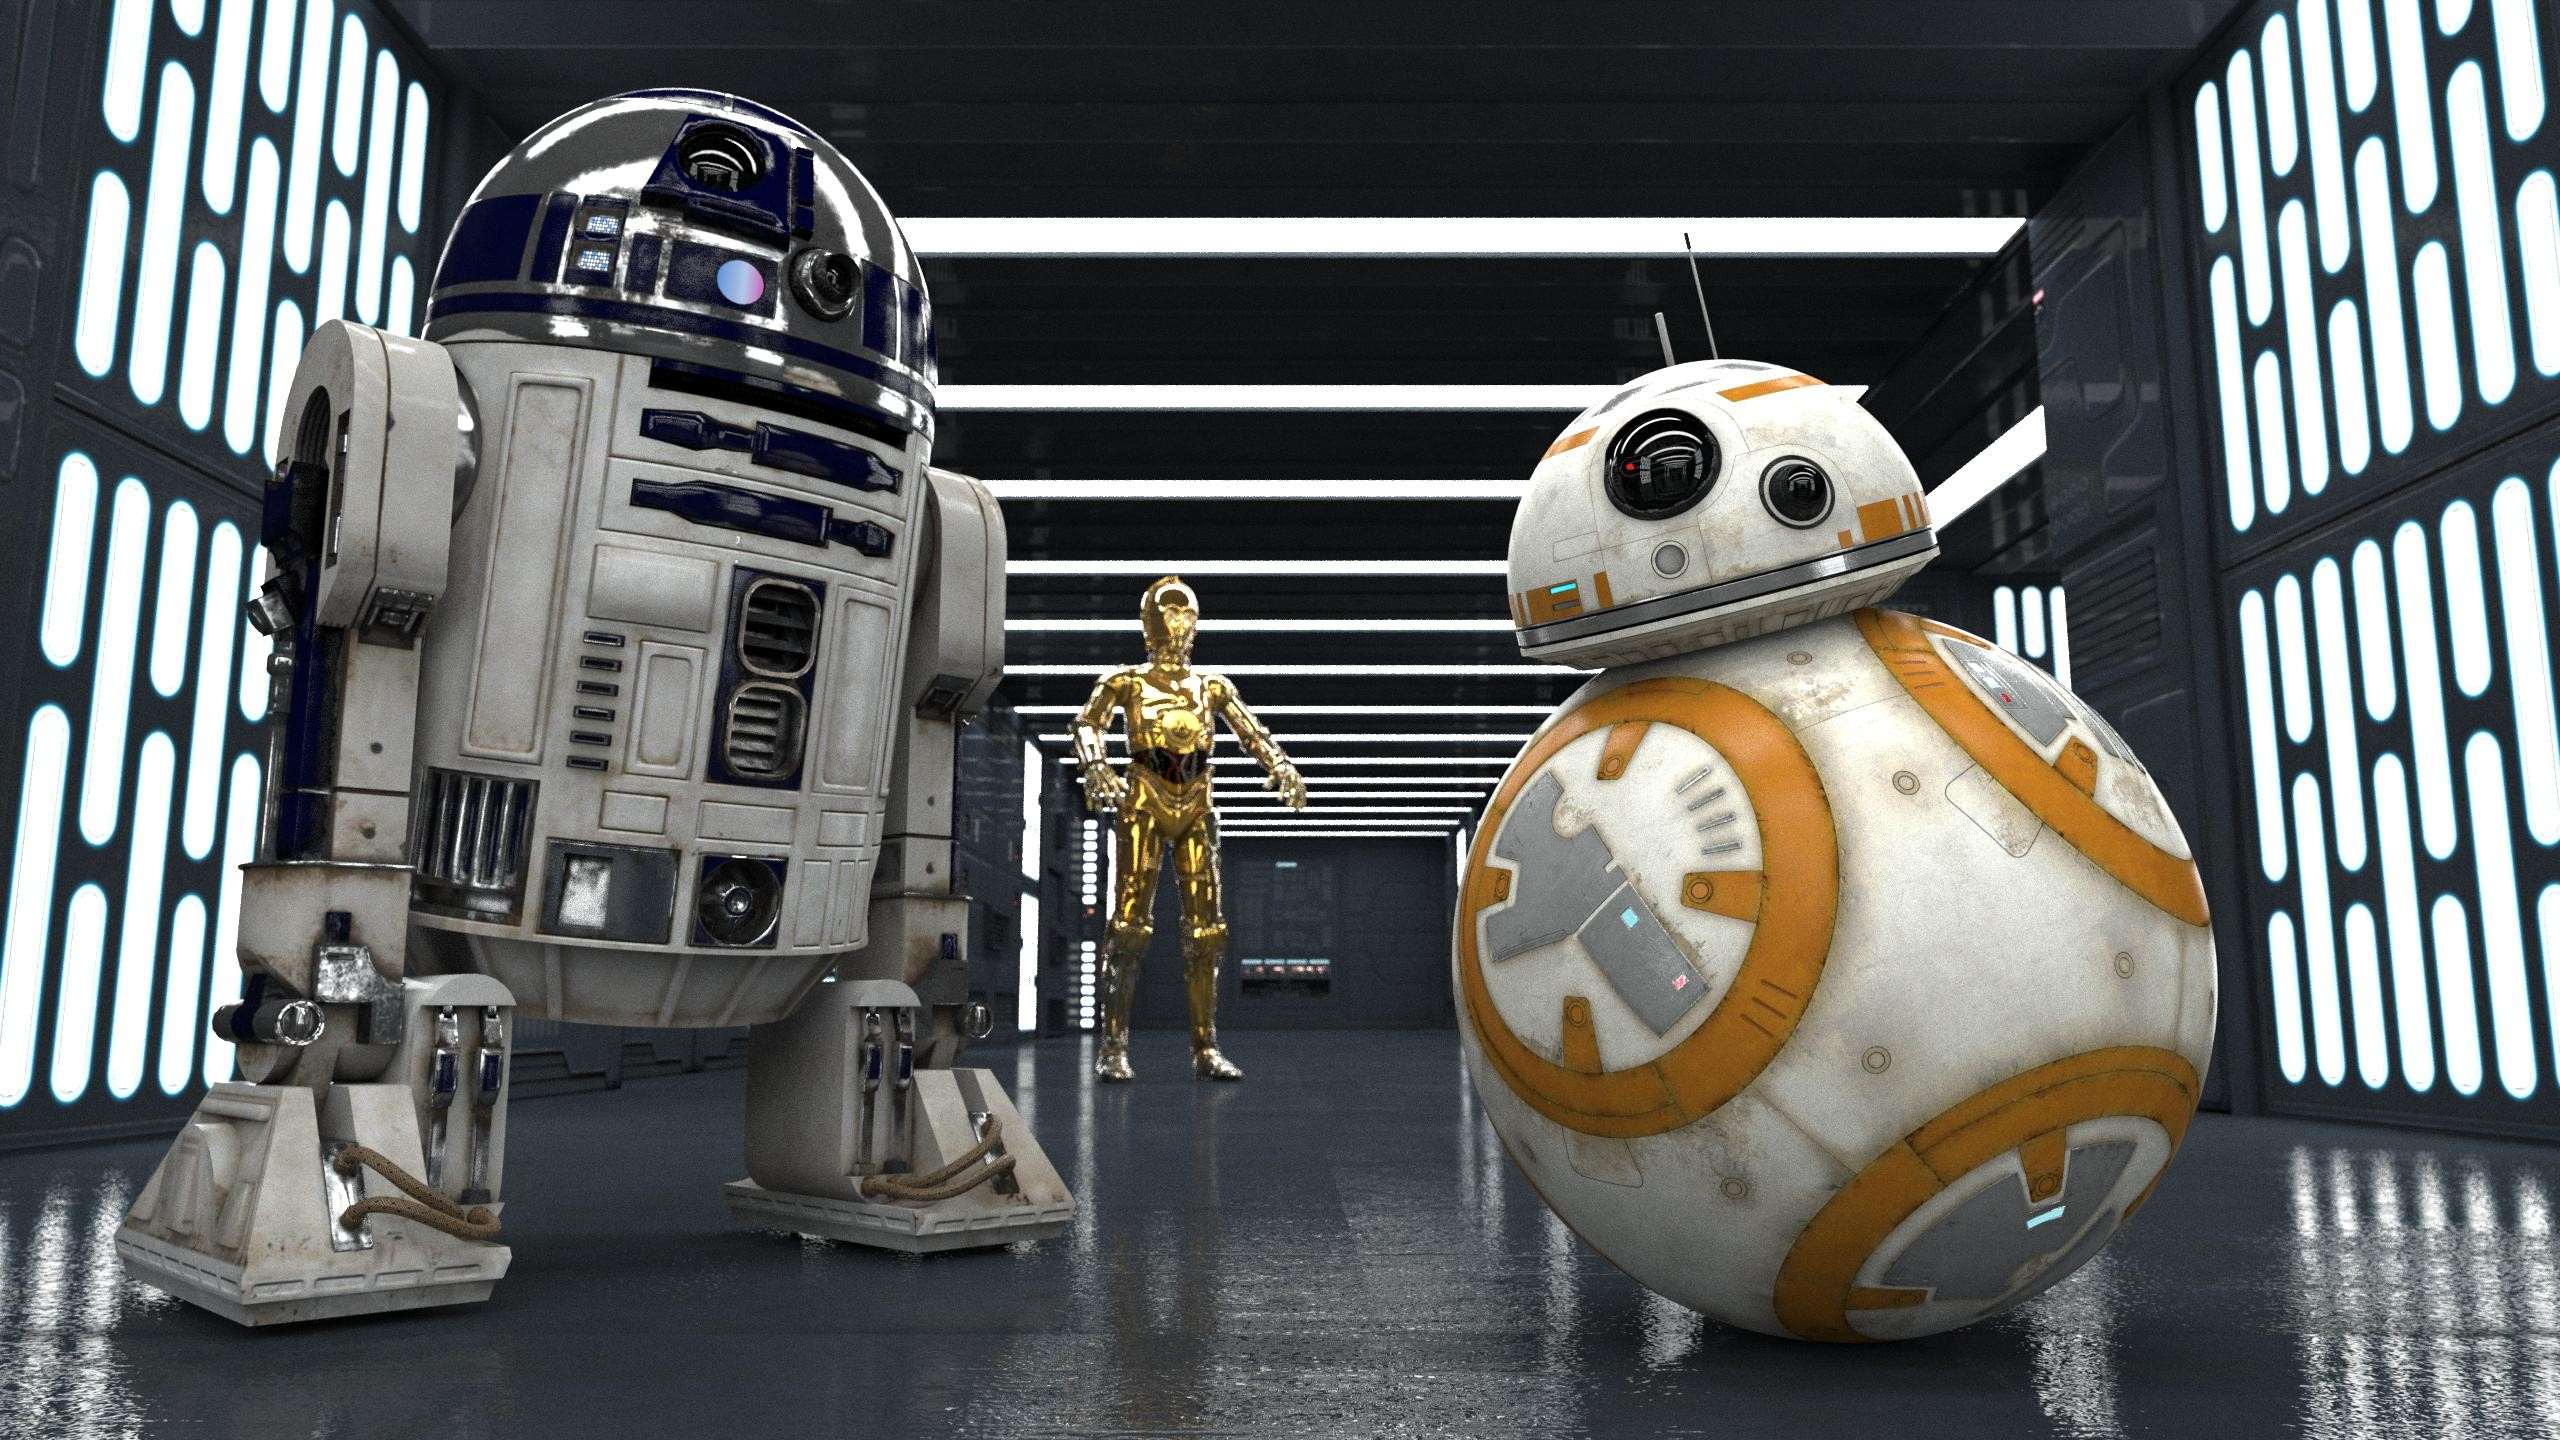 2560x1440 Free download 74 Bb8 R2D2 Wallpapers on WallpaperPlay [] for your Desktop, Mobile \u0026 Tablet | Explore 55+ Star Wars R2-D2 Cool-Space Backgrounds | Star Wars R2-D2 Cool-Space Backgrounds, R2 D2 Wallpaper